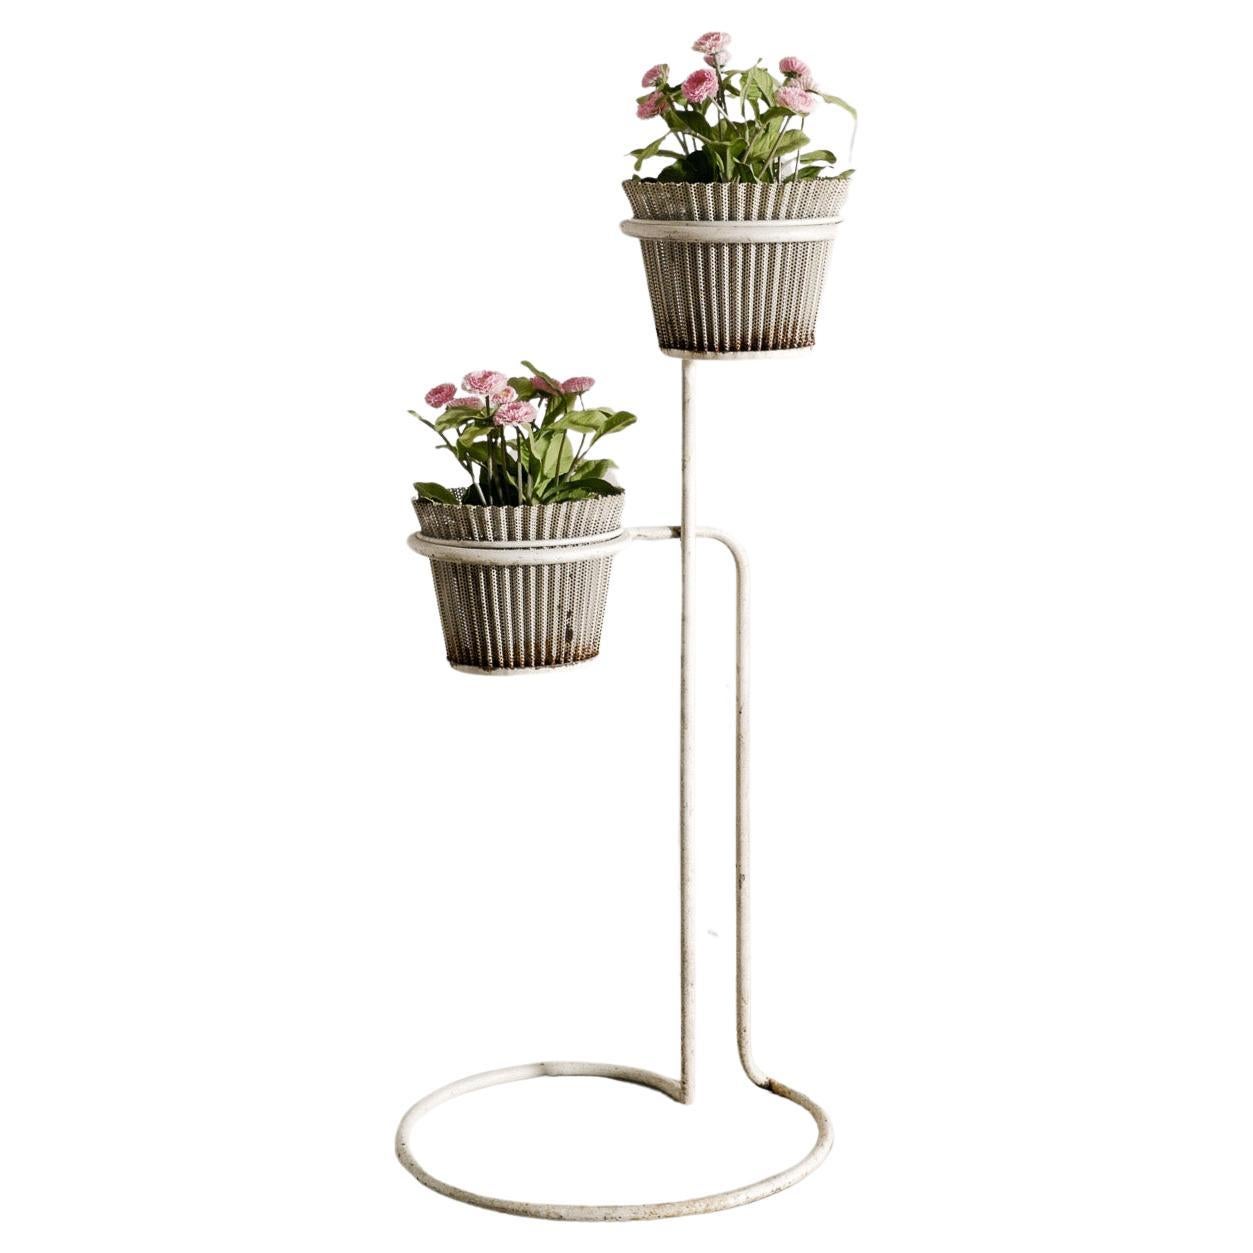 White Mid Century Plant Rack in by Metal Mathieu Matégot Produced in France 1950